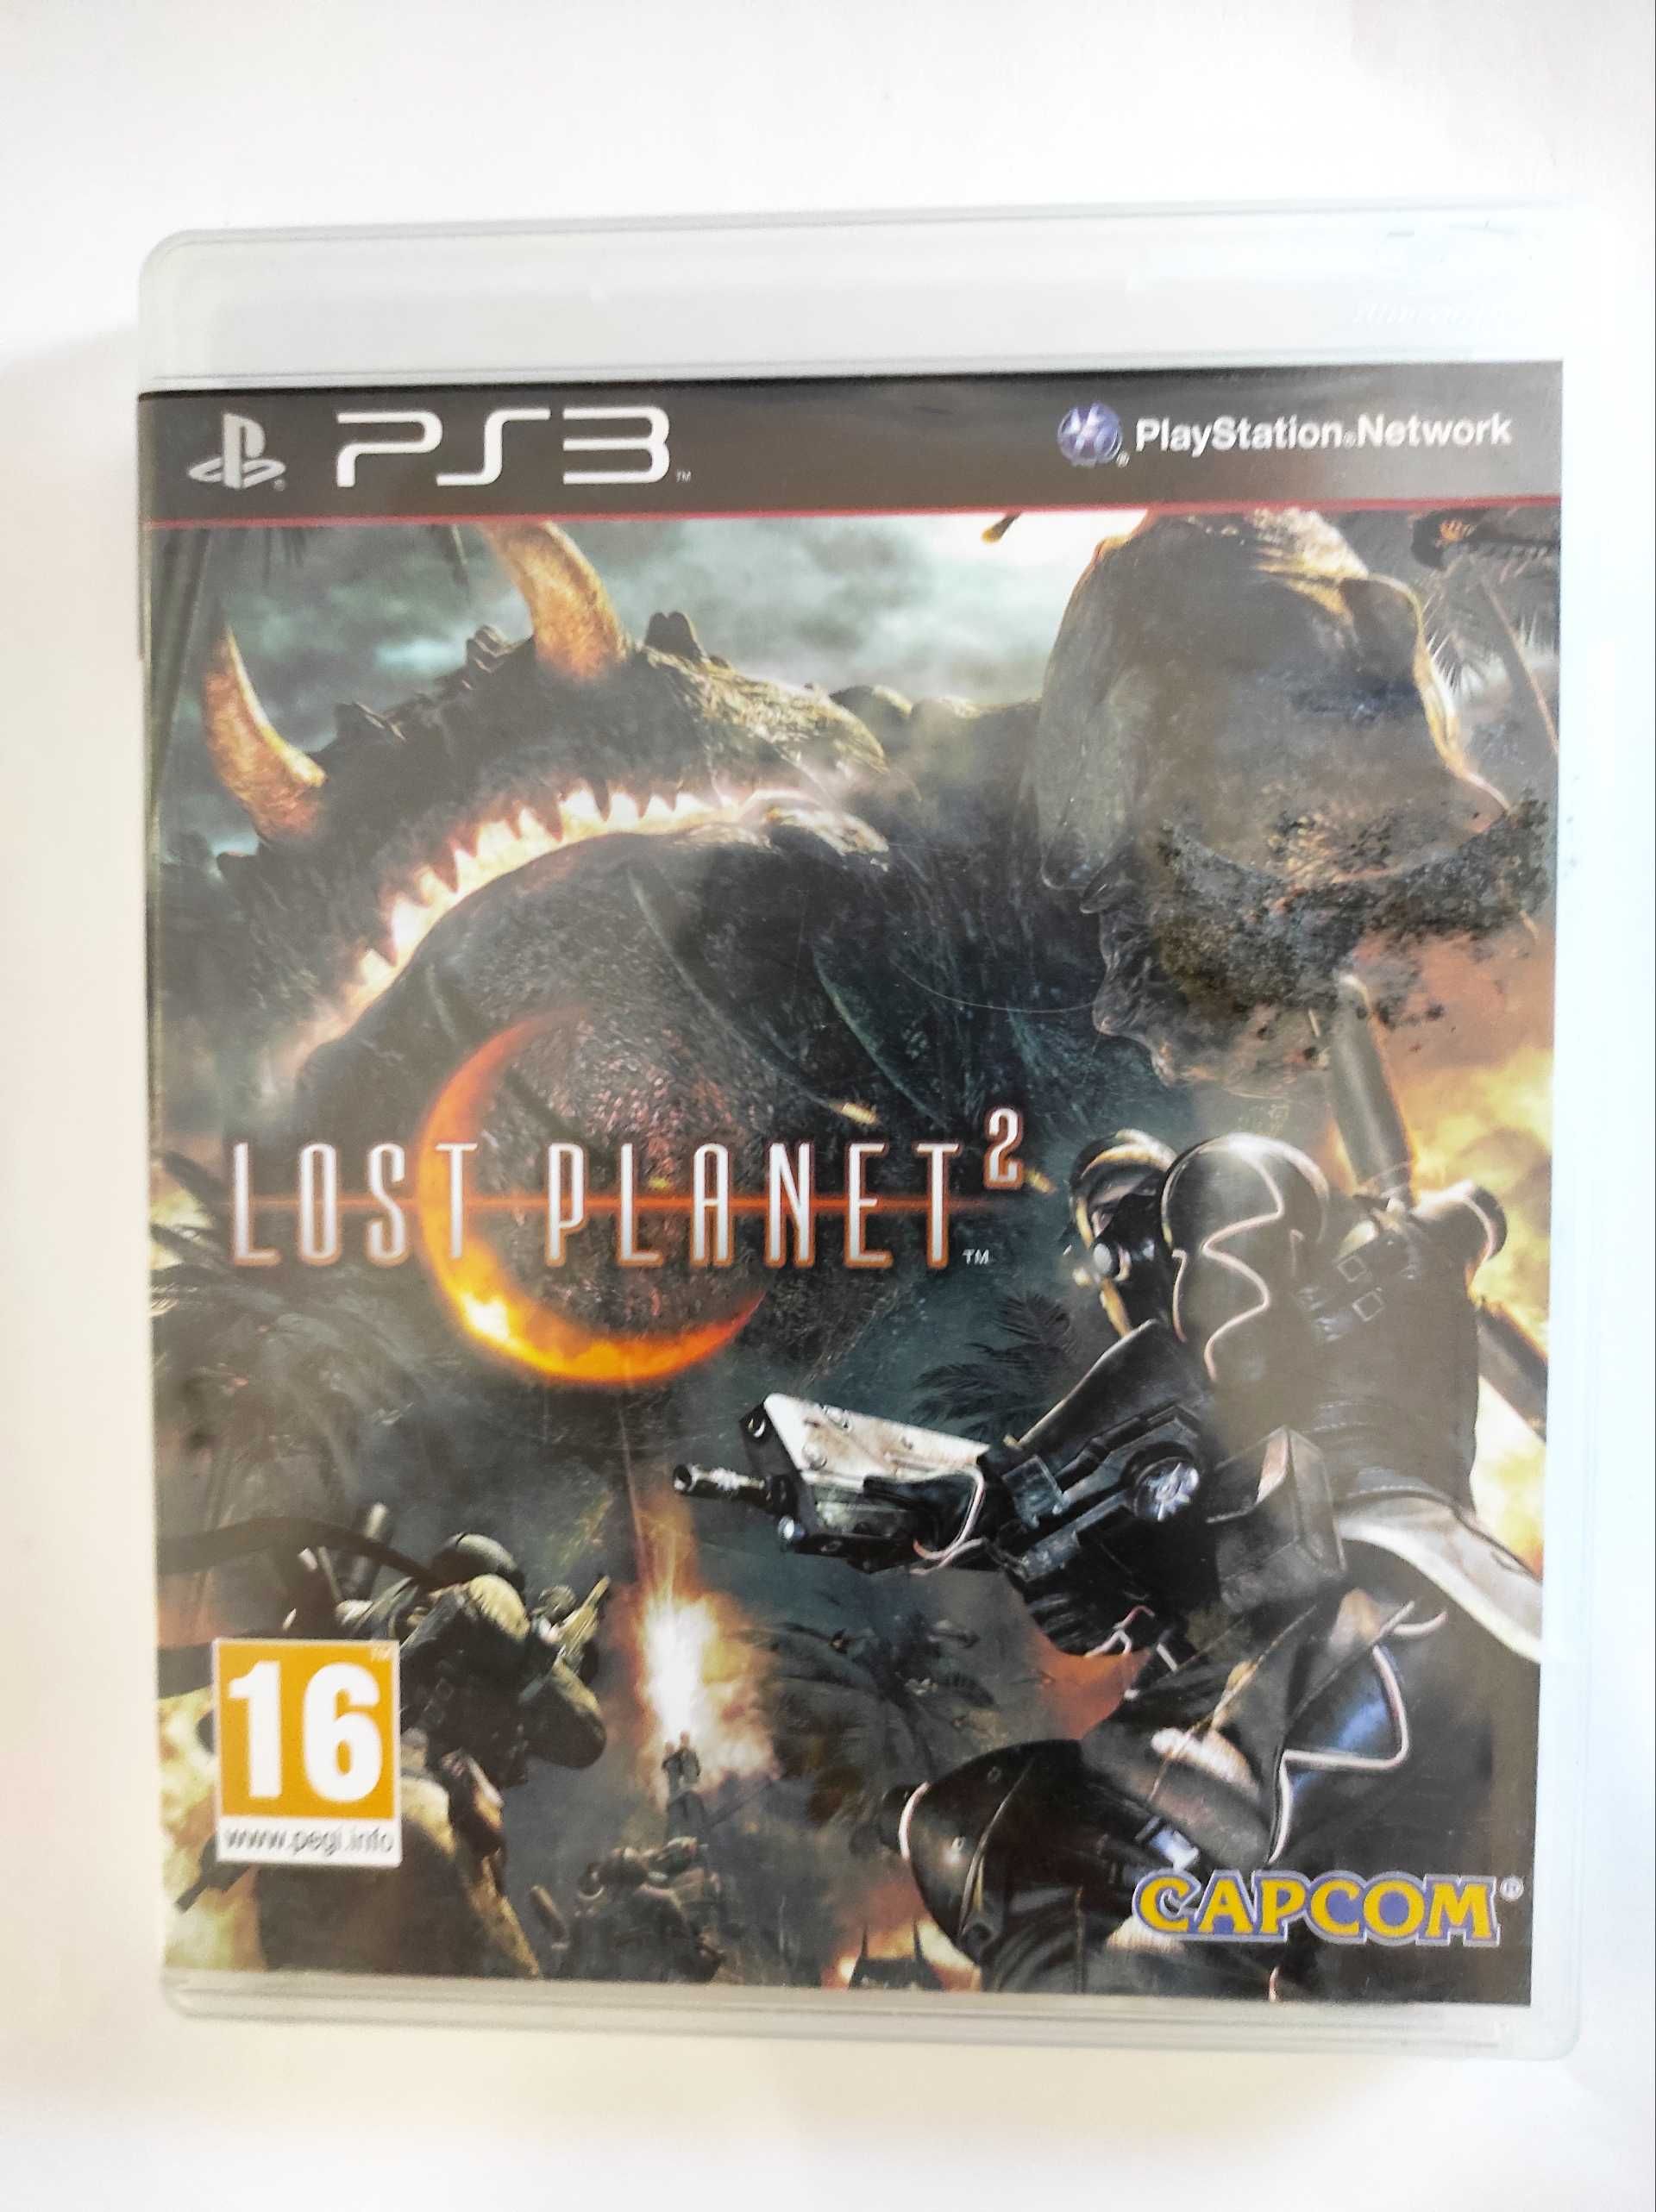 Lost planet 2 ps3